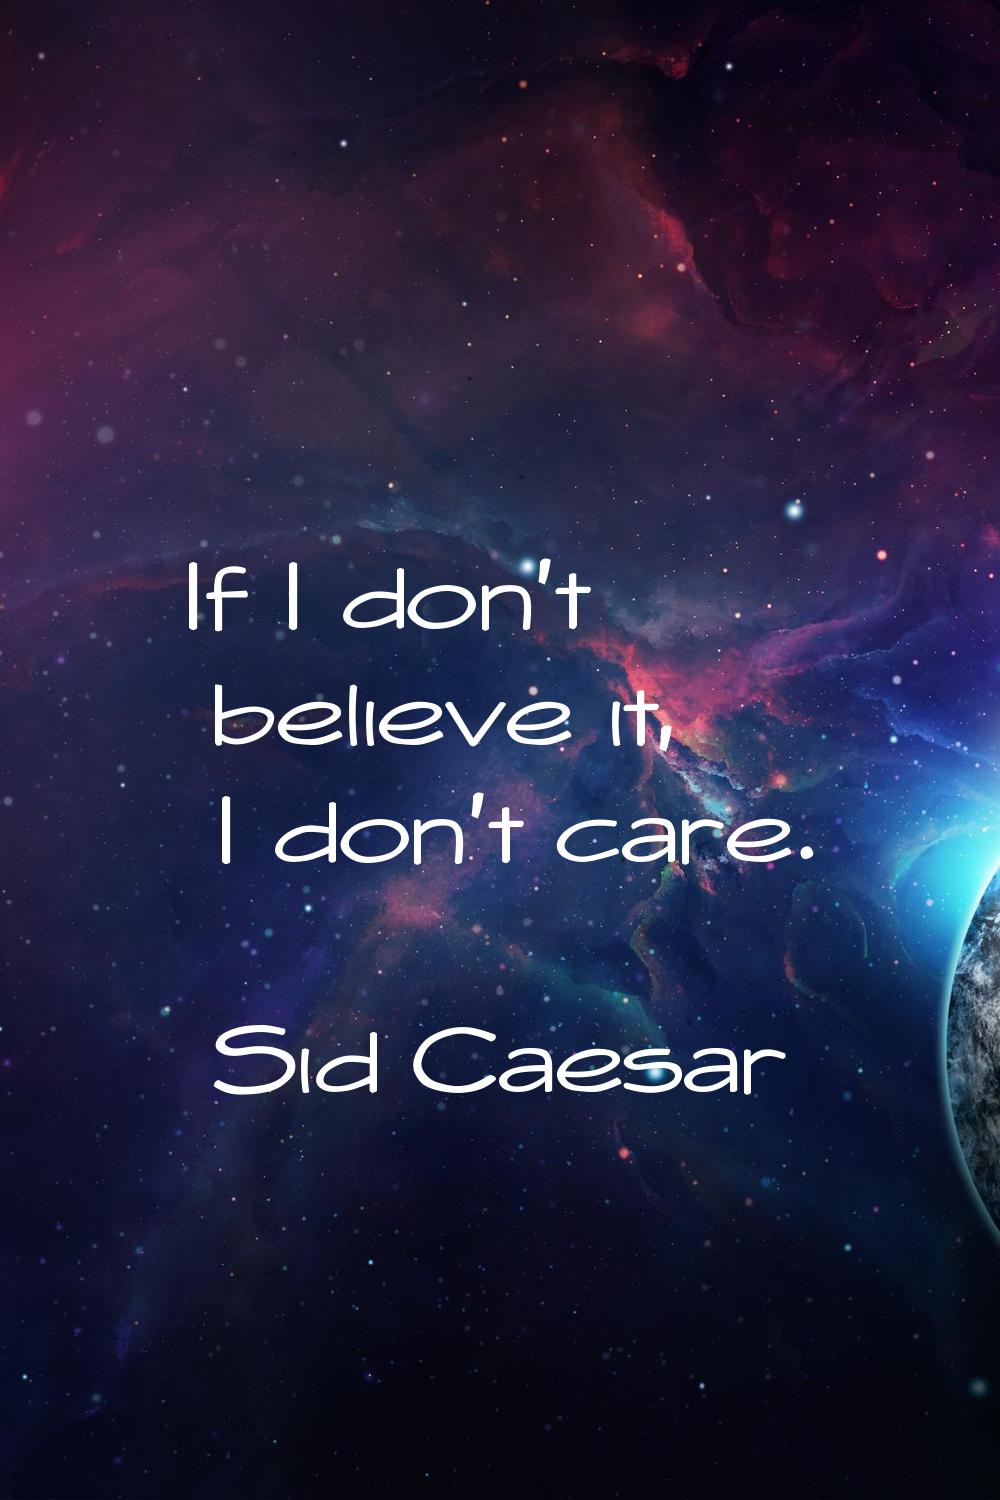 If I don't believe it, I don't care.